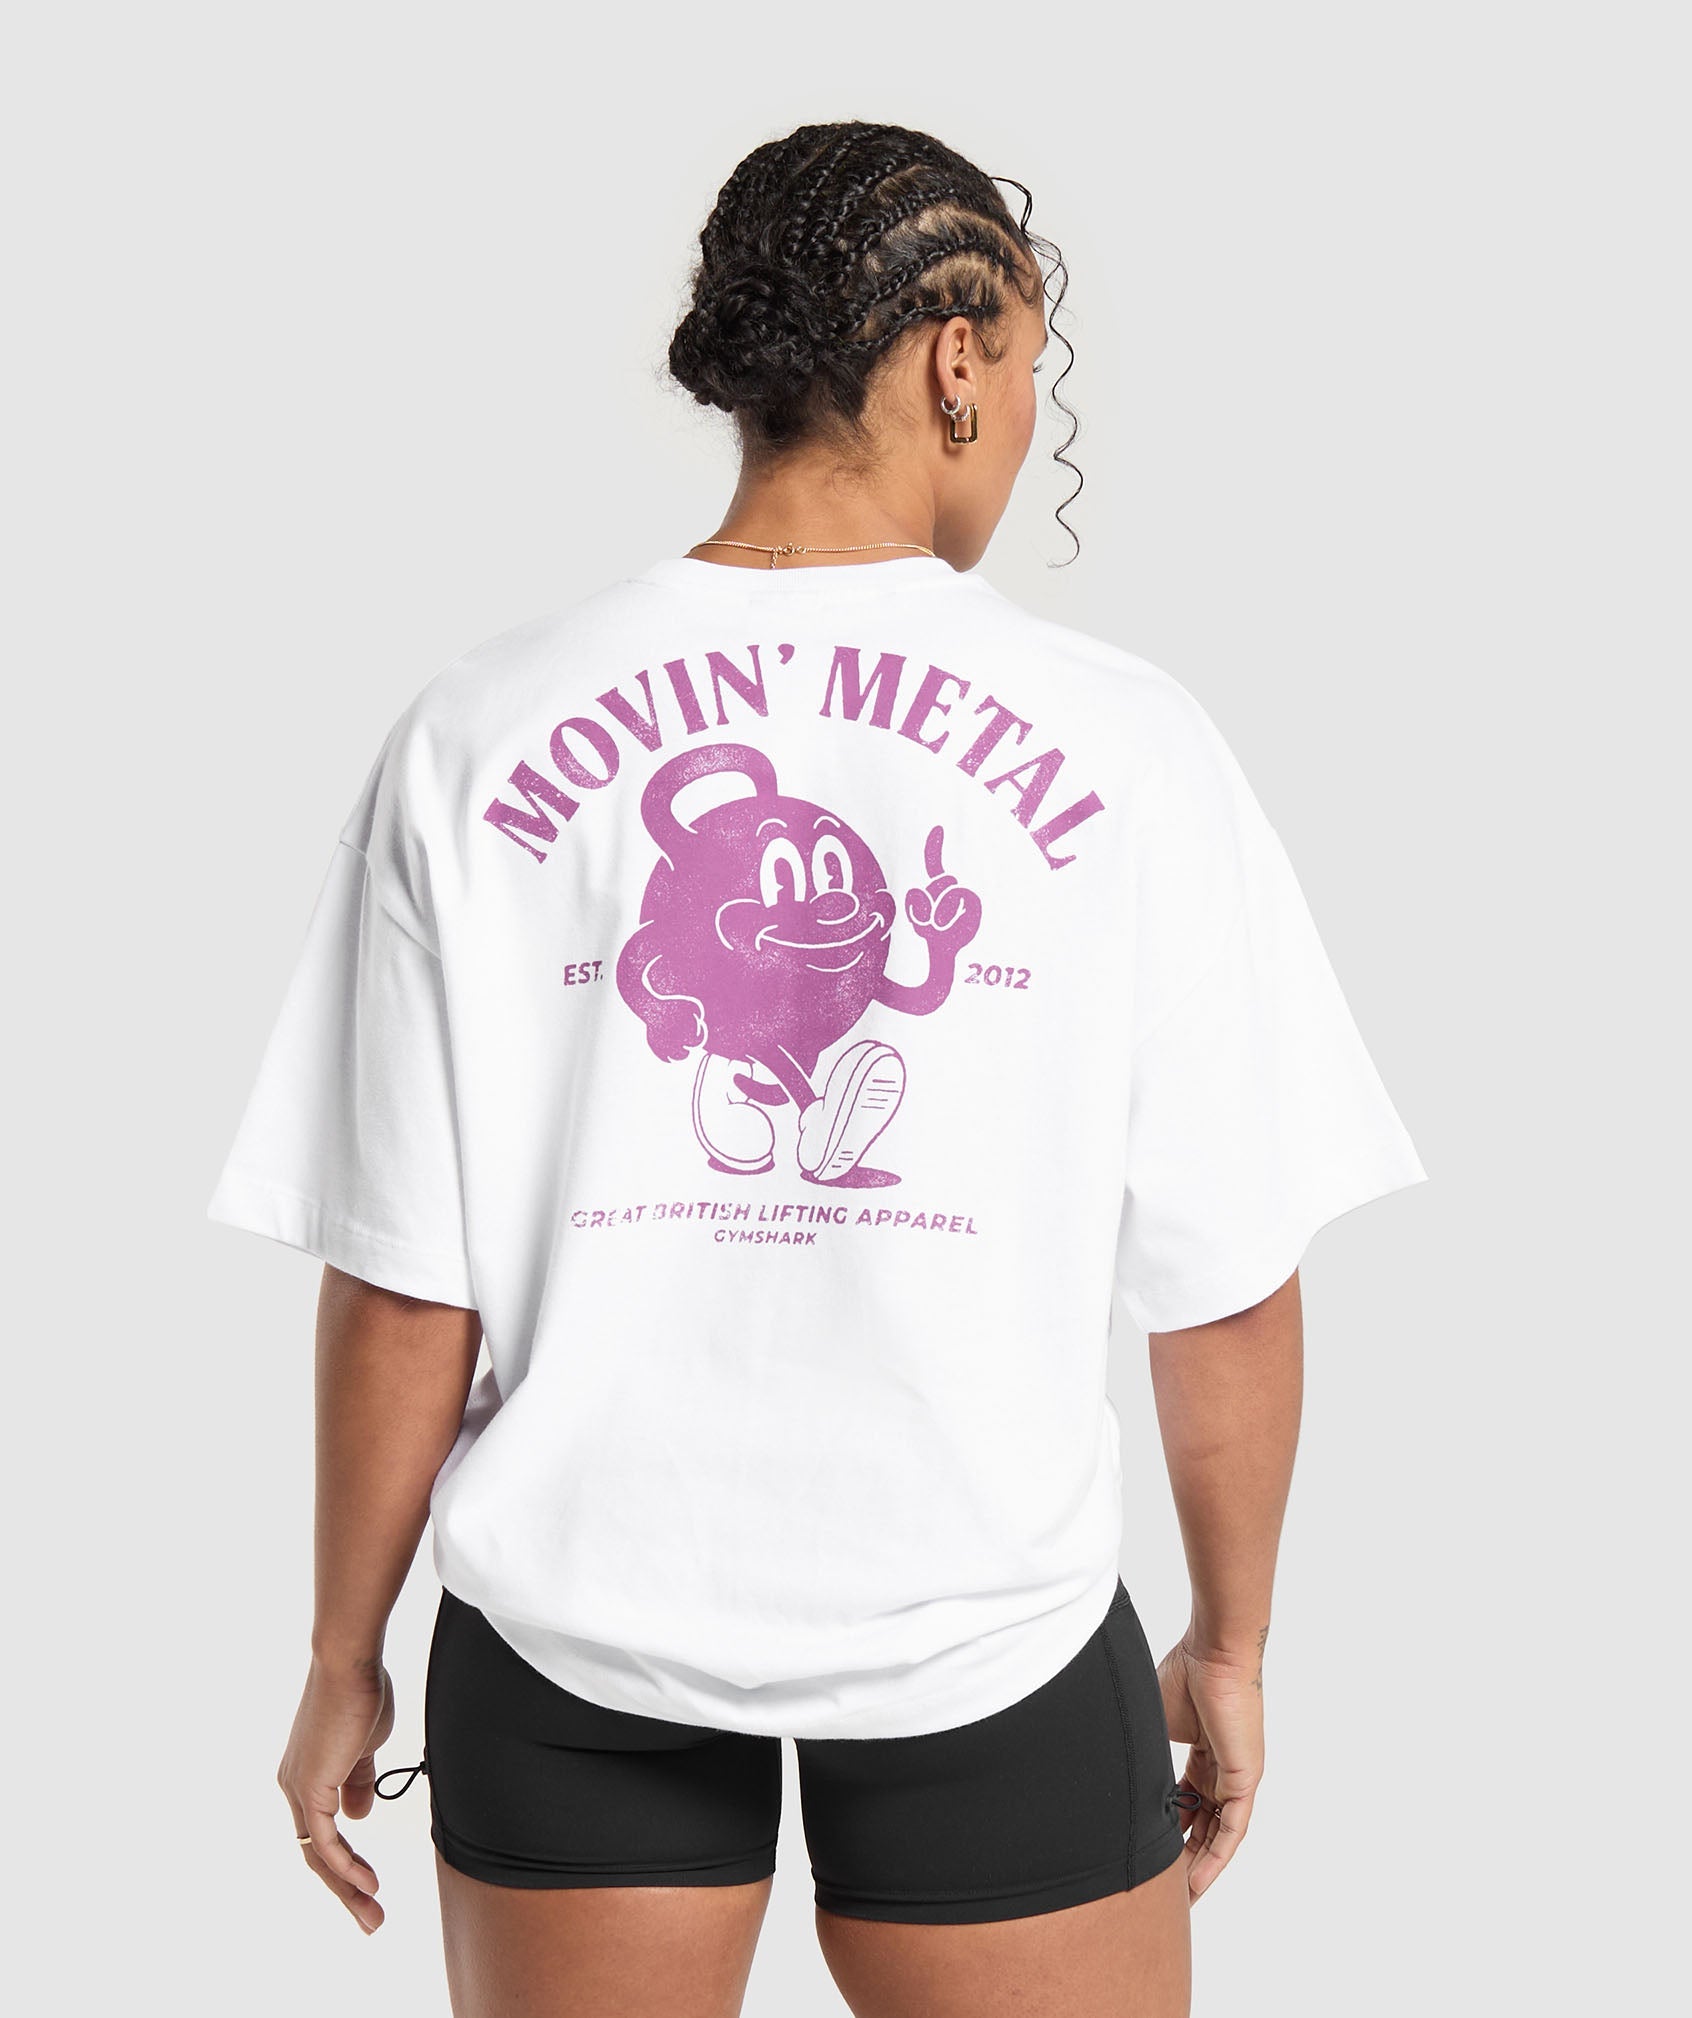 Movin' Metal T-Shirt in White - view 1